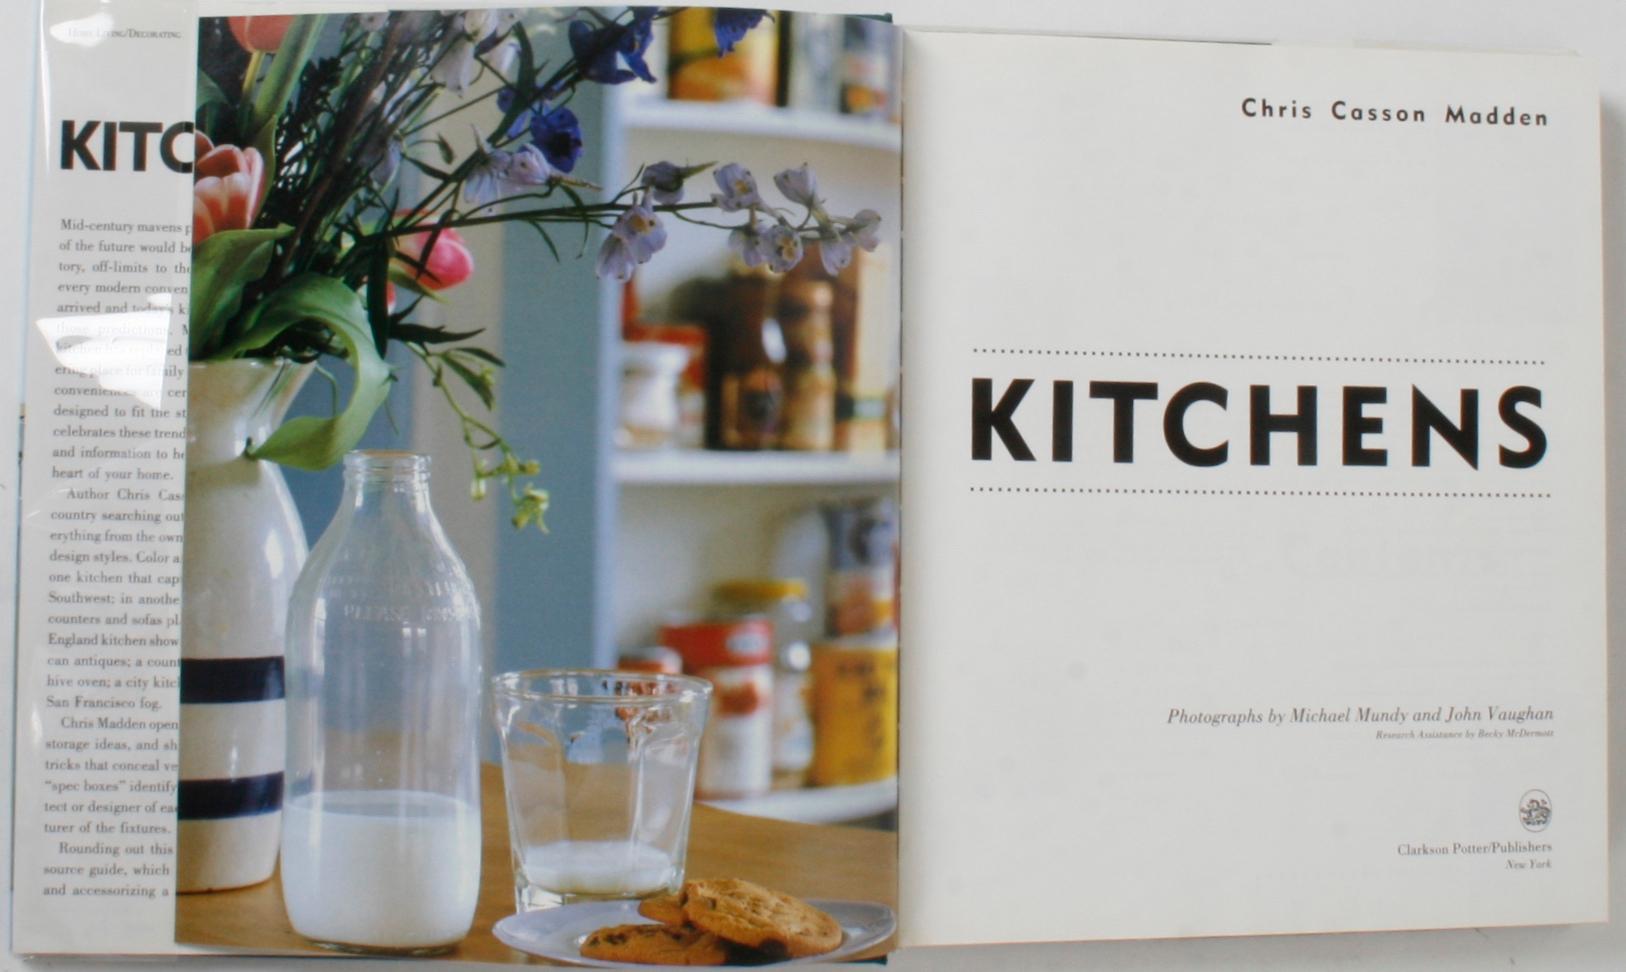 Kitchens: Information and Inspiration for Making Kitchens the Heart of the Home. New York: Clarkson Potter/Publishers, 1993. Hardcover with dust jacket and protective glassine cover. 287 pp. Showcase of kitchens meant to inspire the at-home